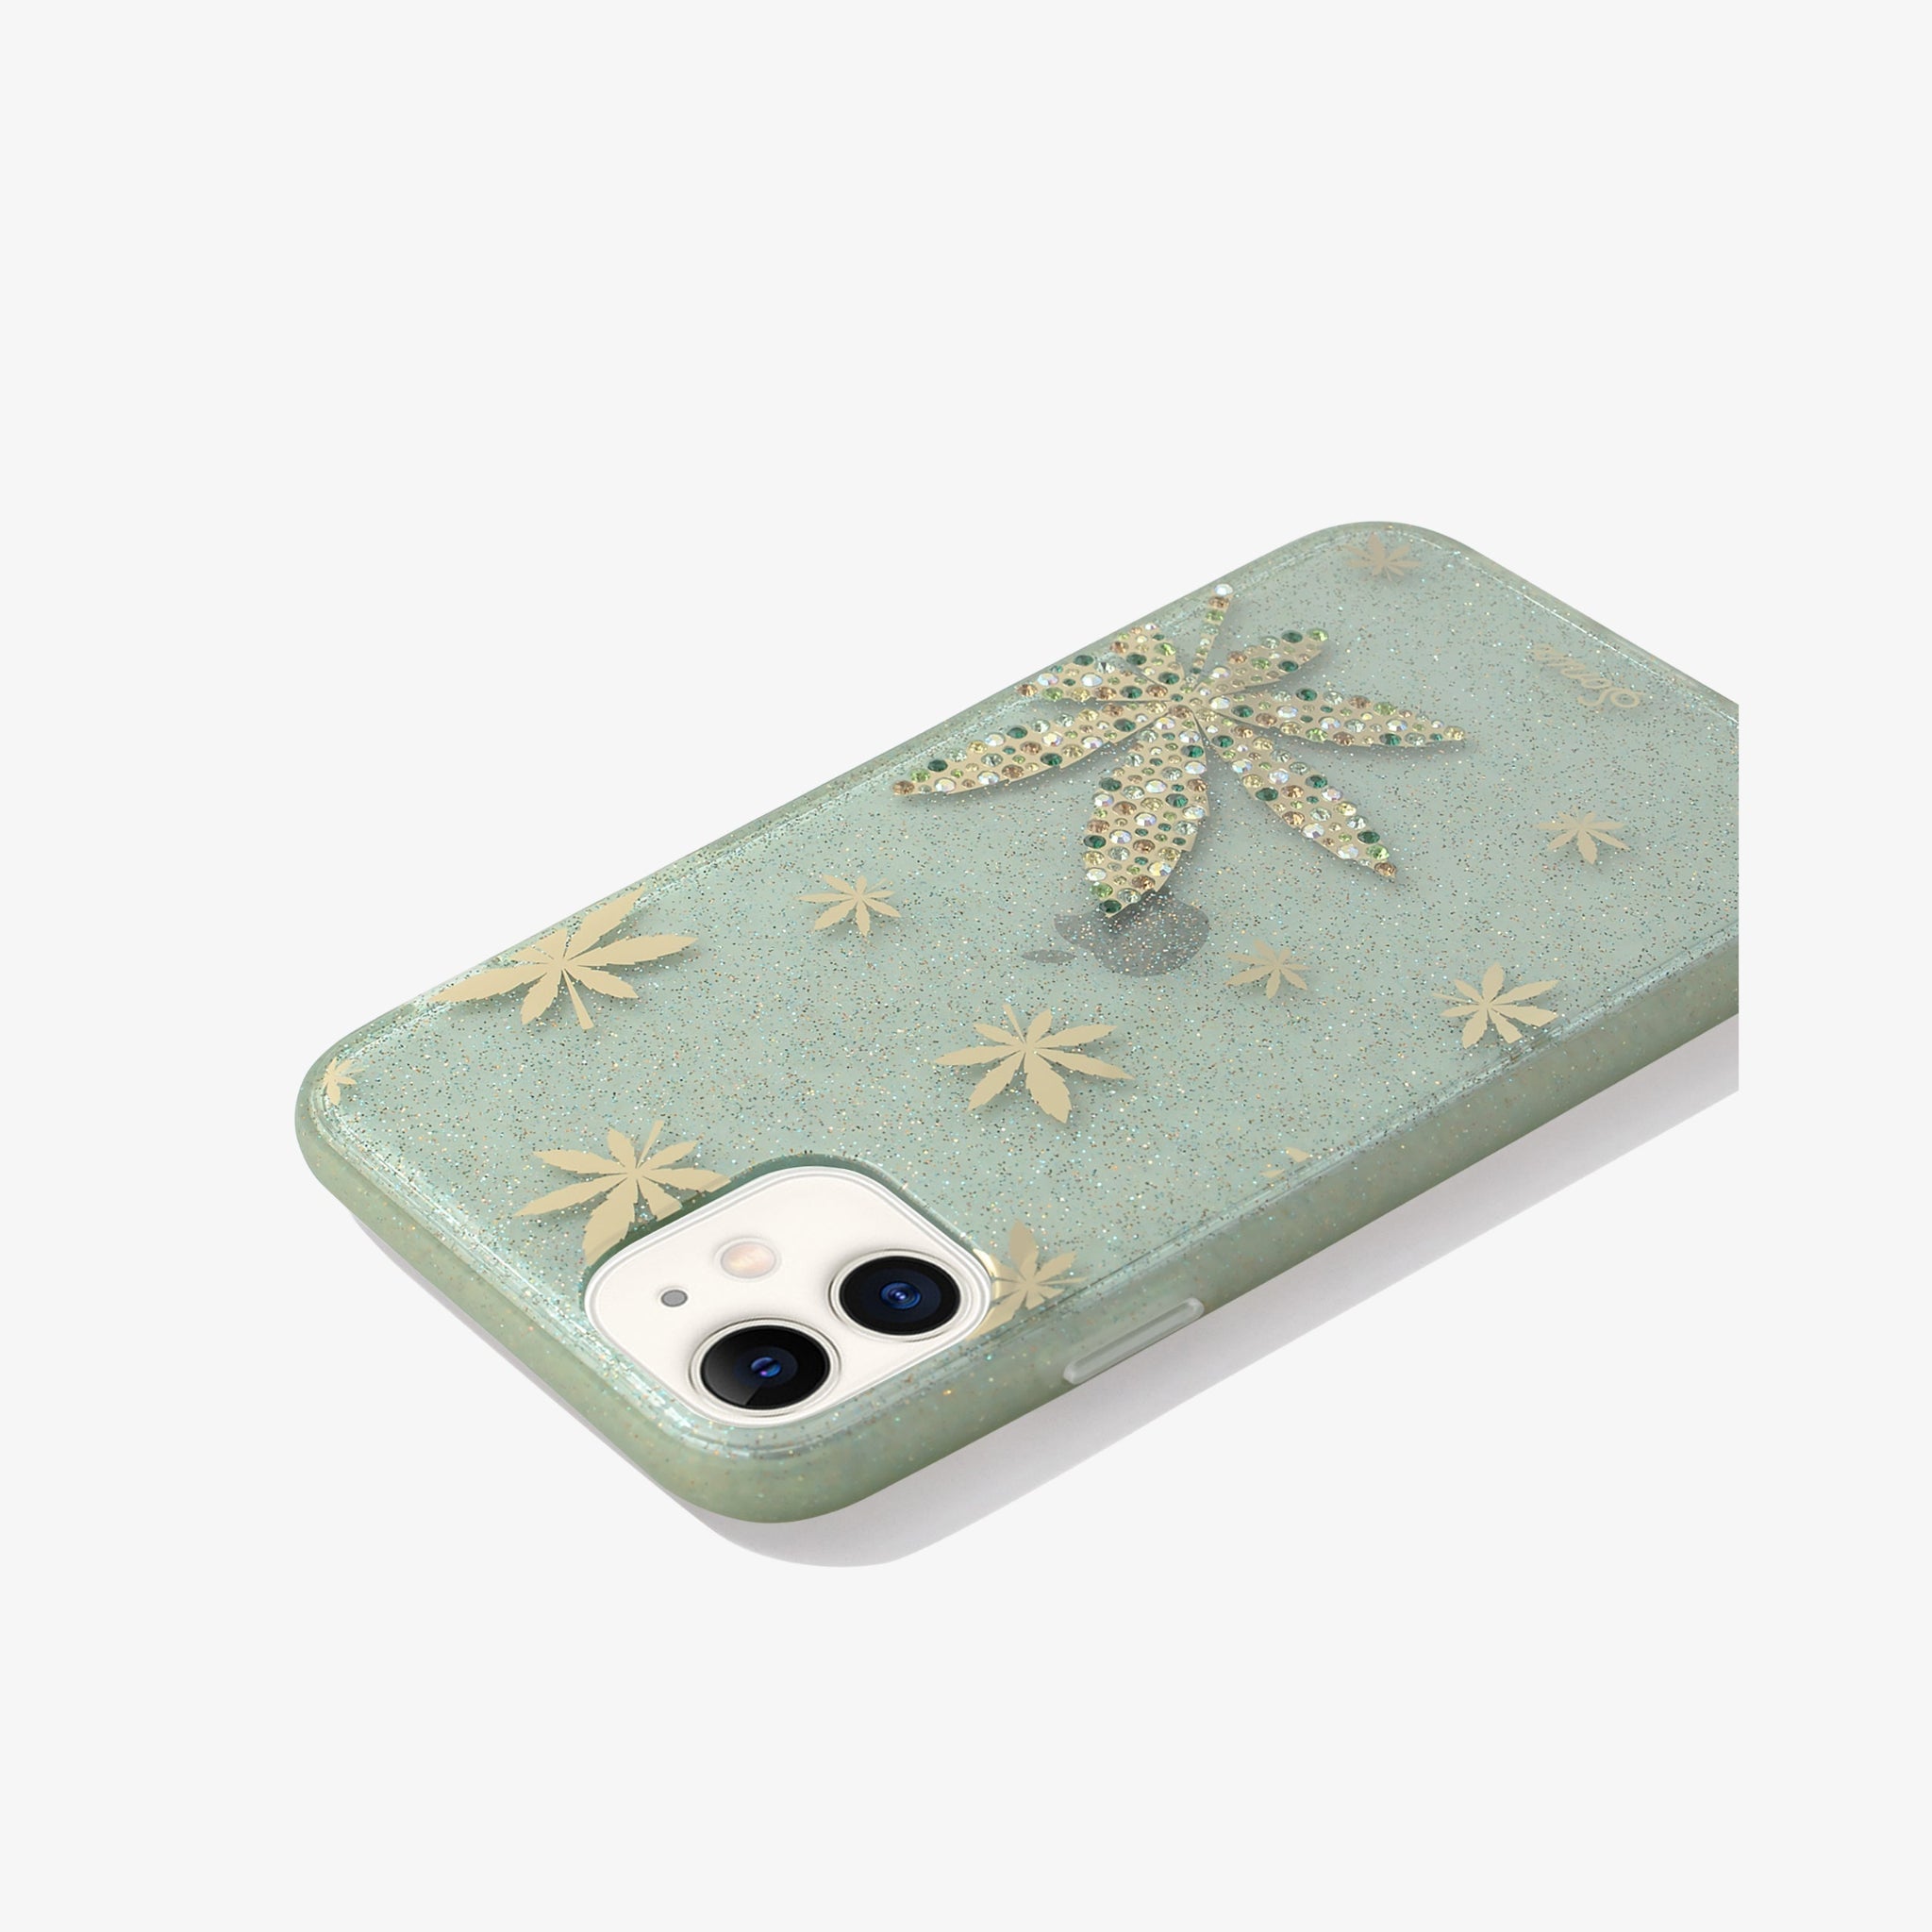 a leaf design, embellished with an assortment of green rhinestones shown on an iphone 11 side view